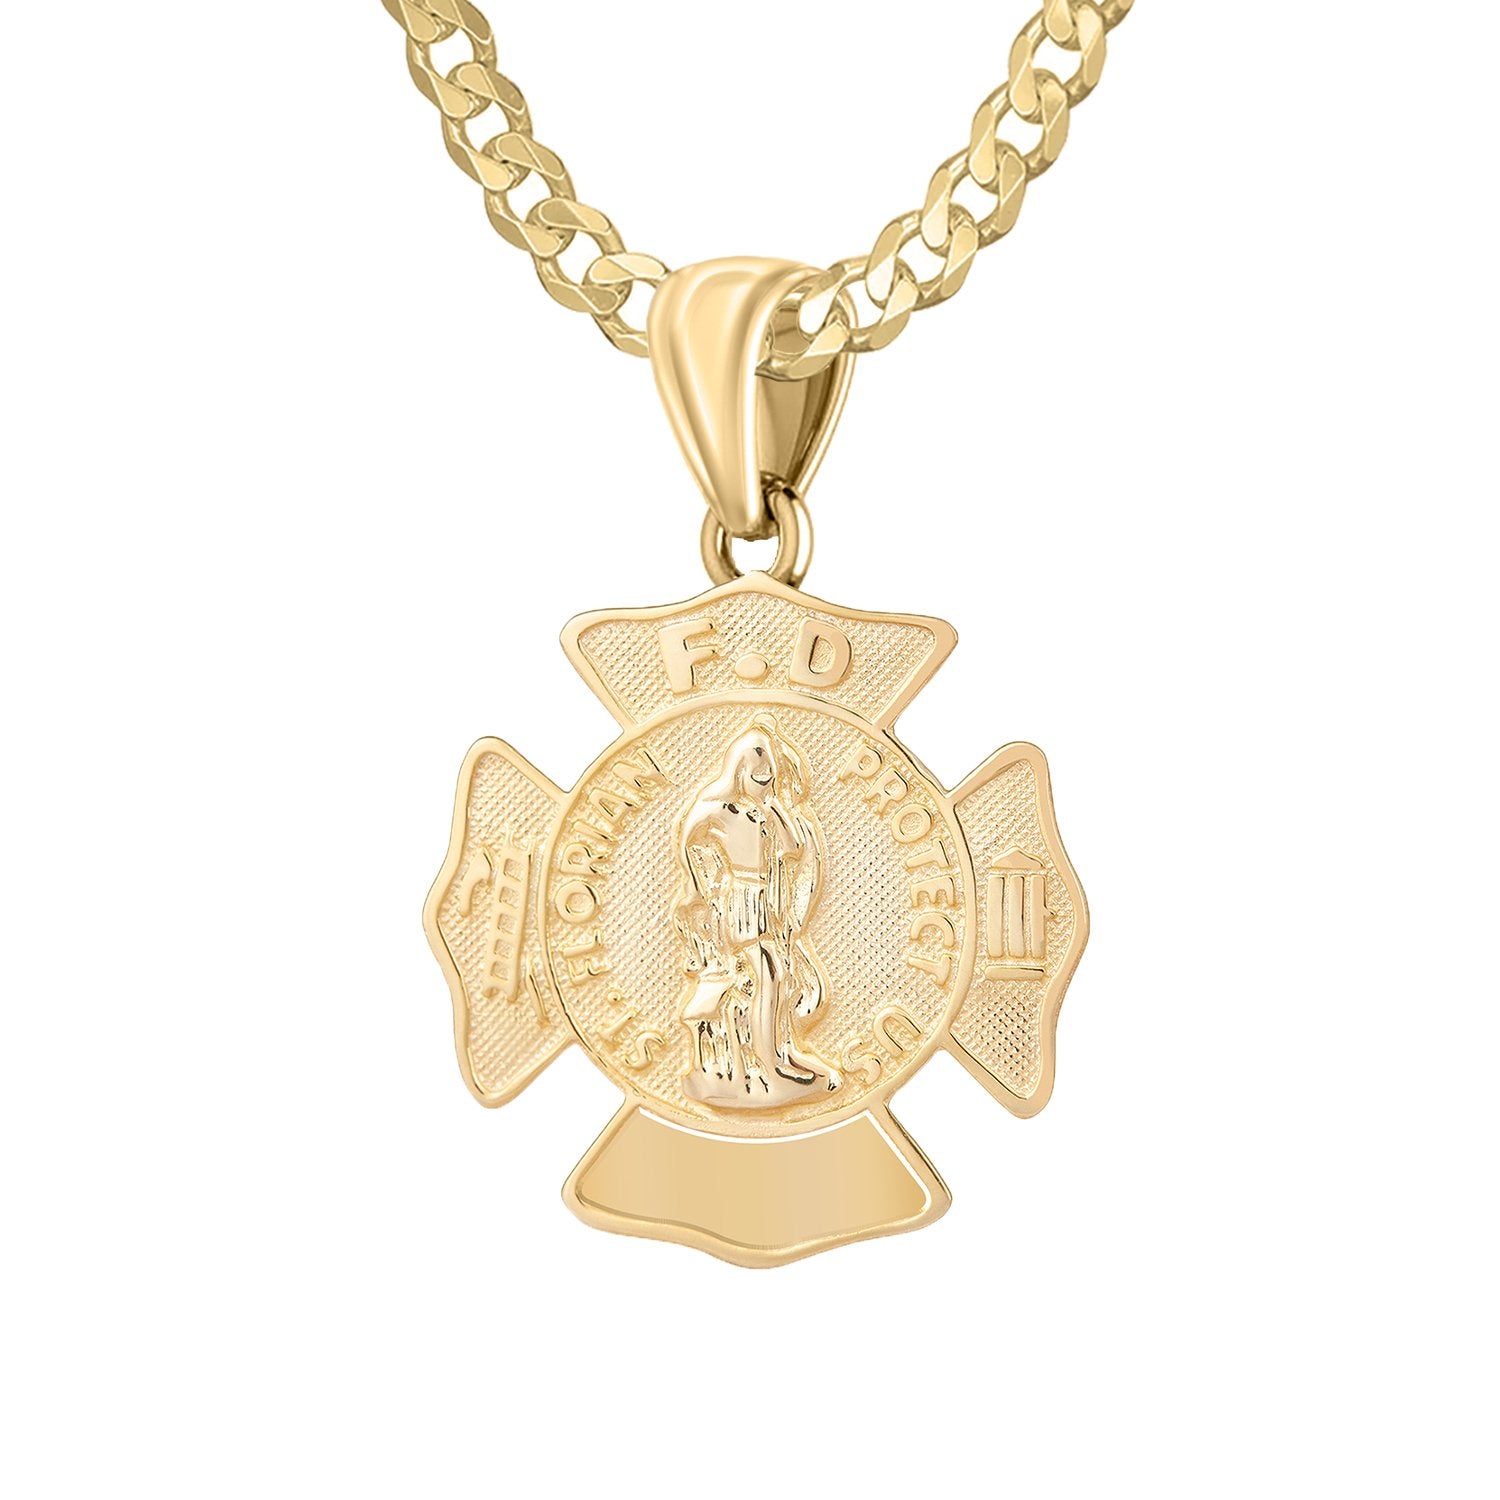 Firefighter Pendant In Gold With Chain - 2.6mm Curb Chain